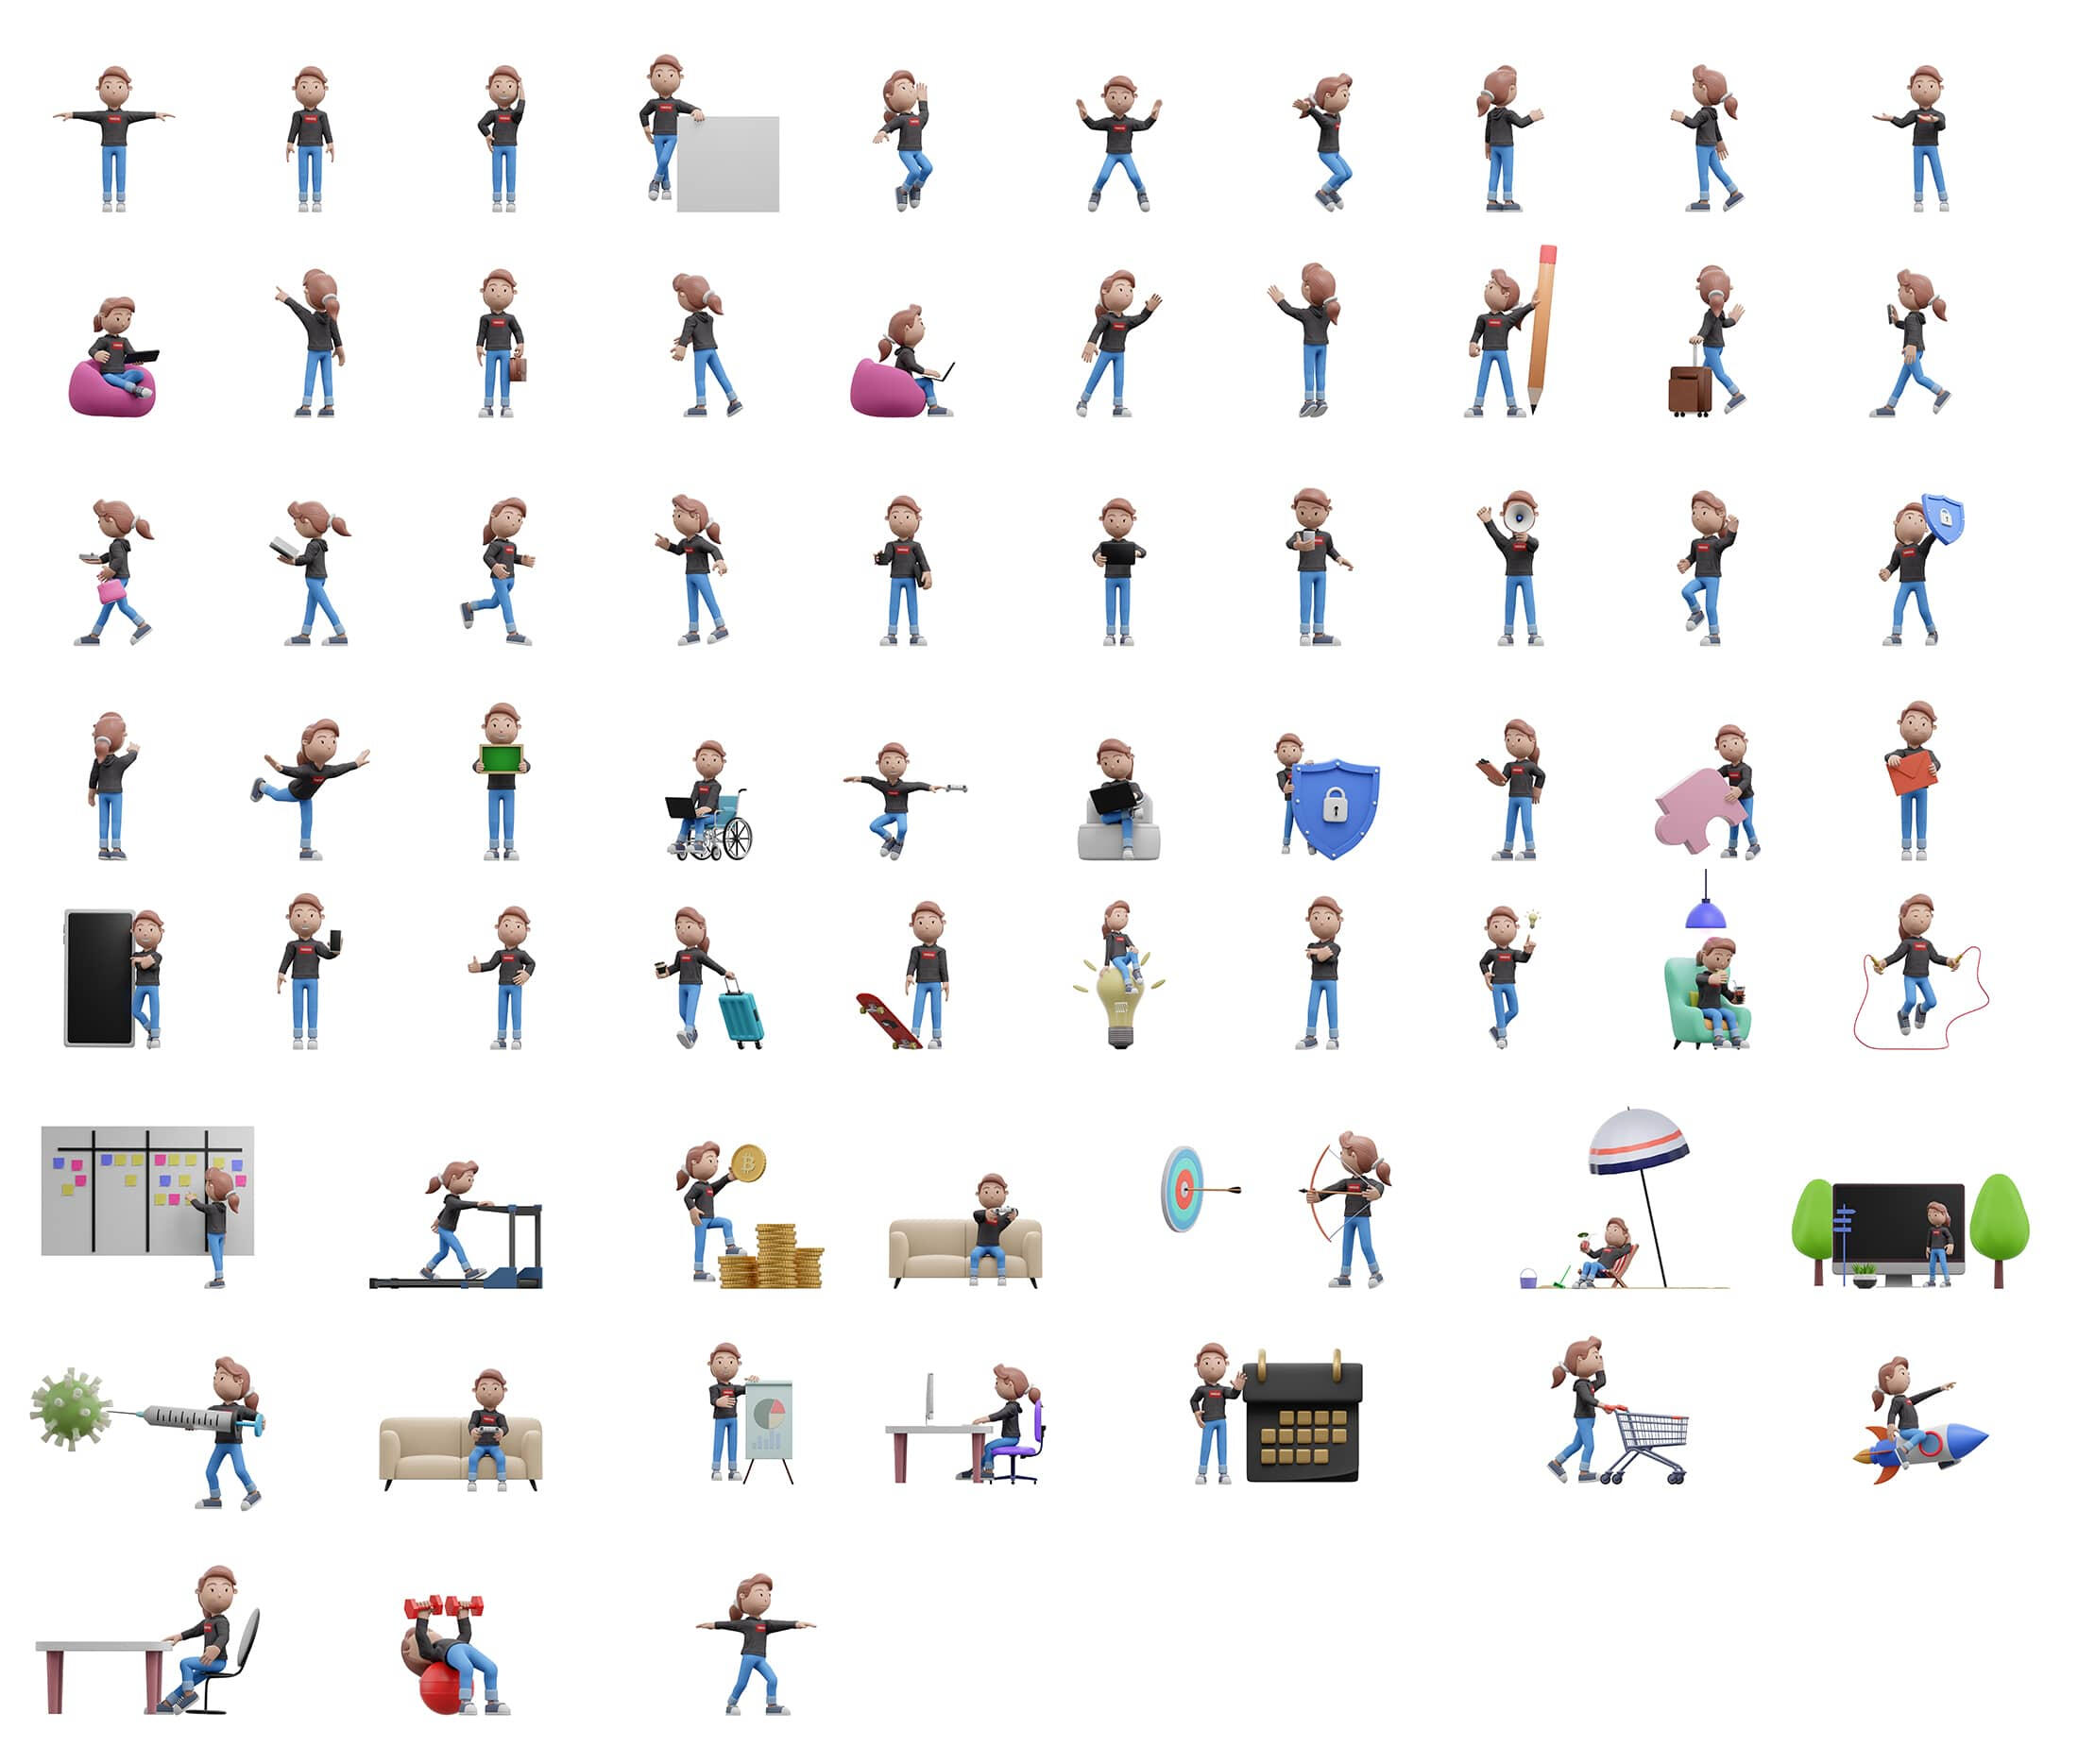 67 poses of 3D characters. All of them are included our 3D illustration library.